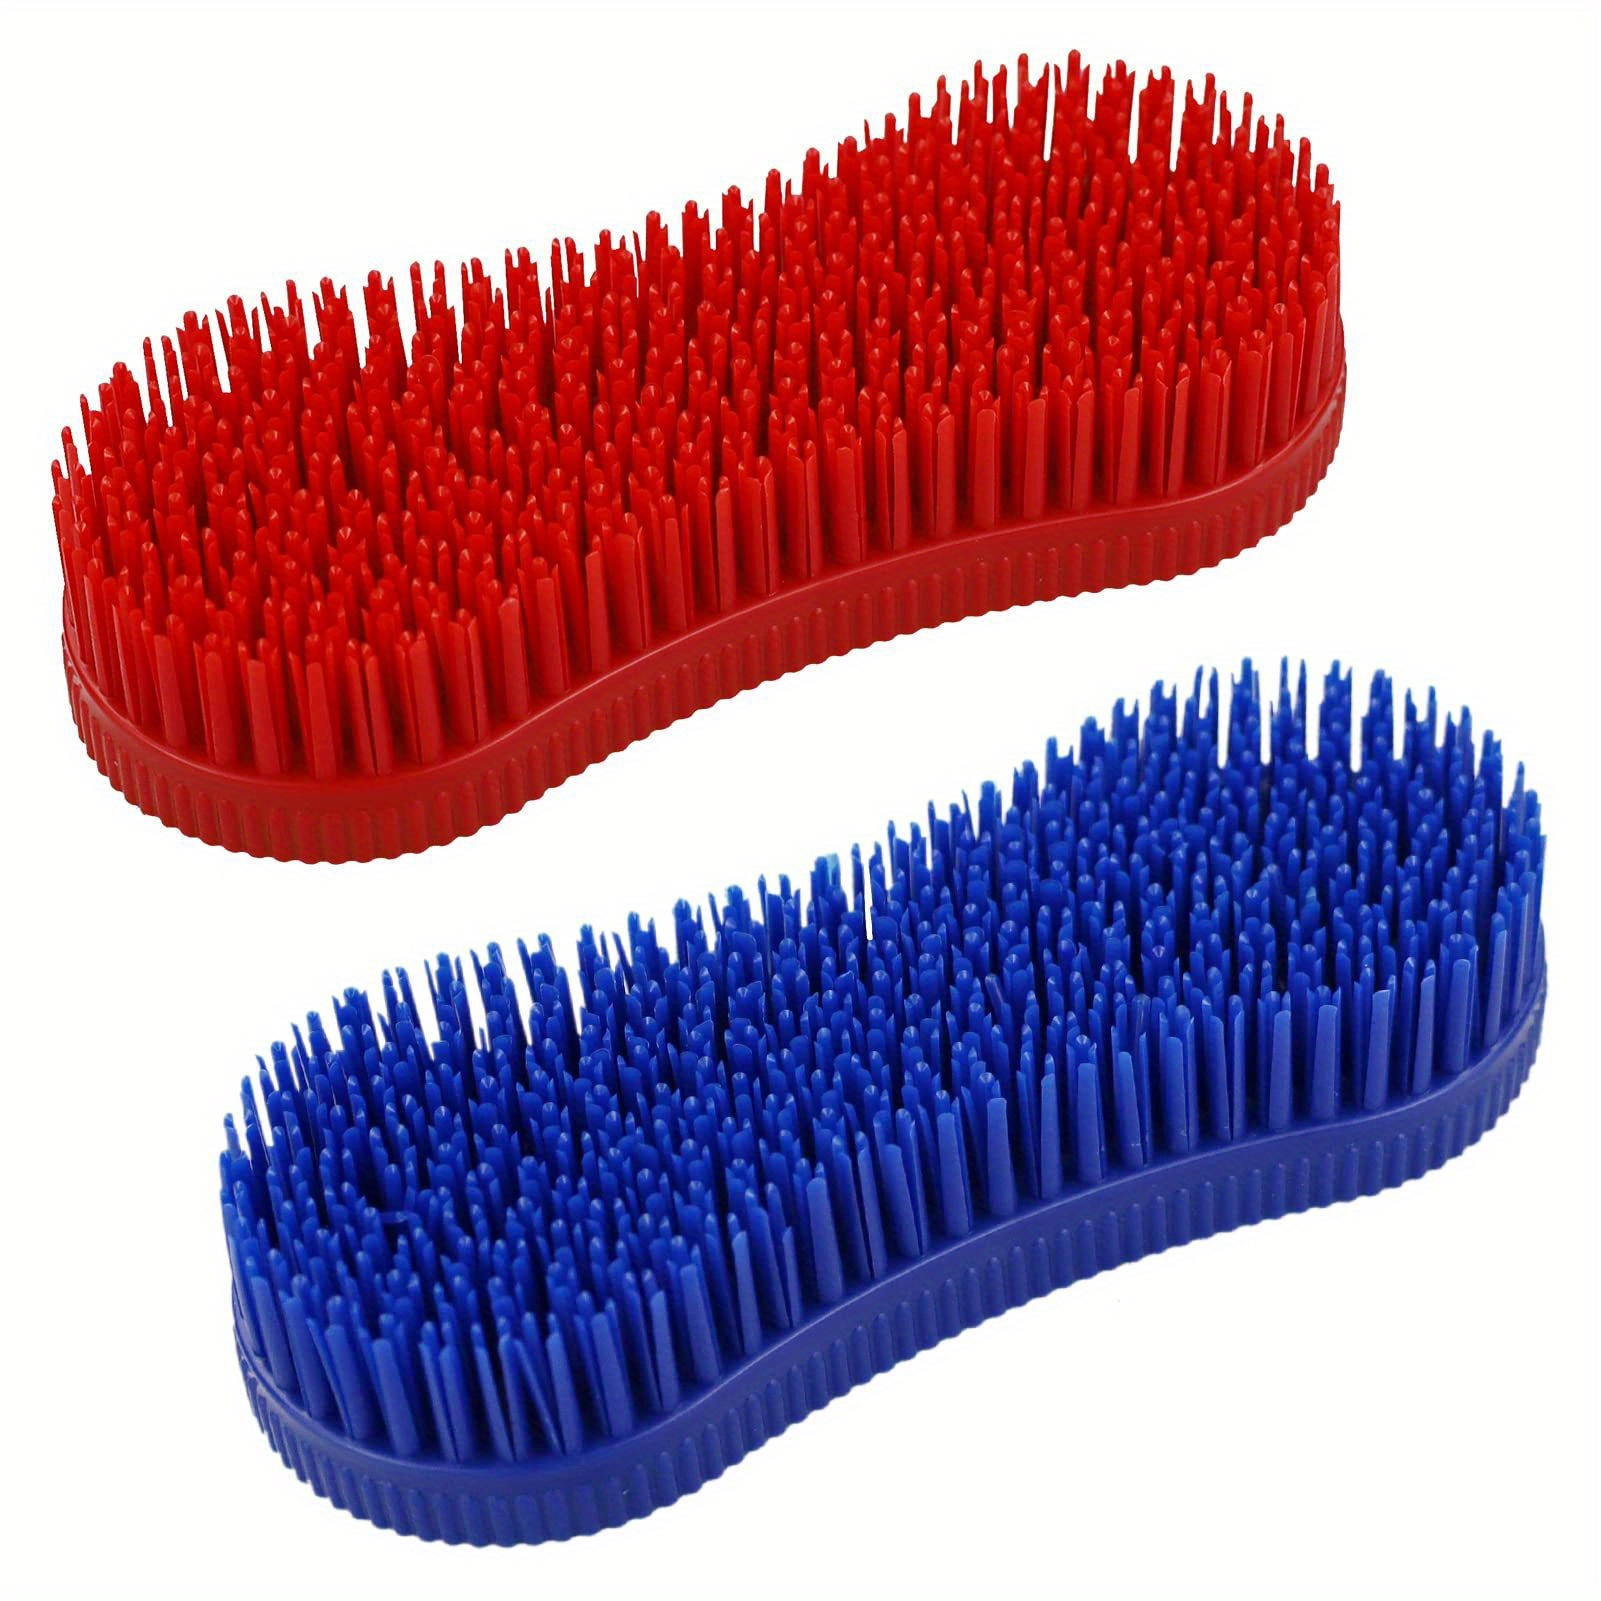 

2pcs Silicone Horse Cleaning Grooming Brushes, Horse Grooming Brush, Equestrian Massage Tool For Horse Grooming Care Supplies